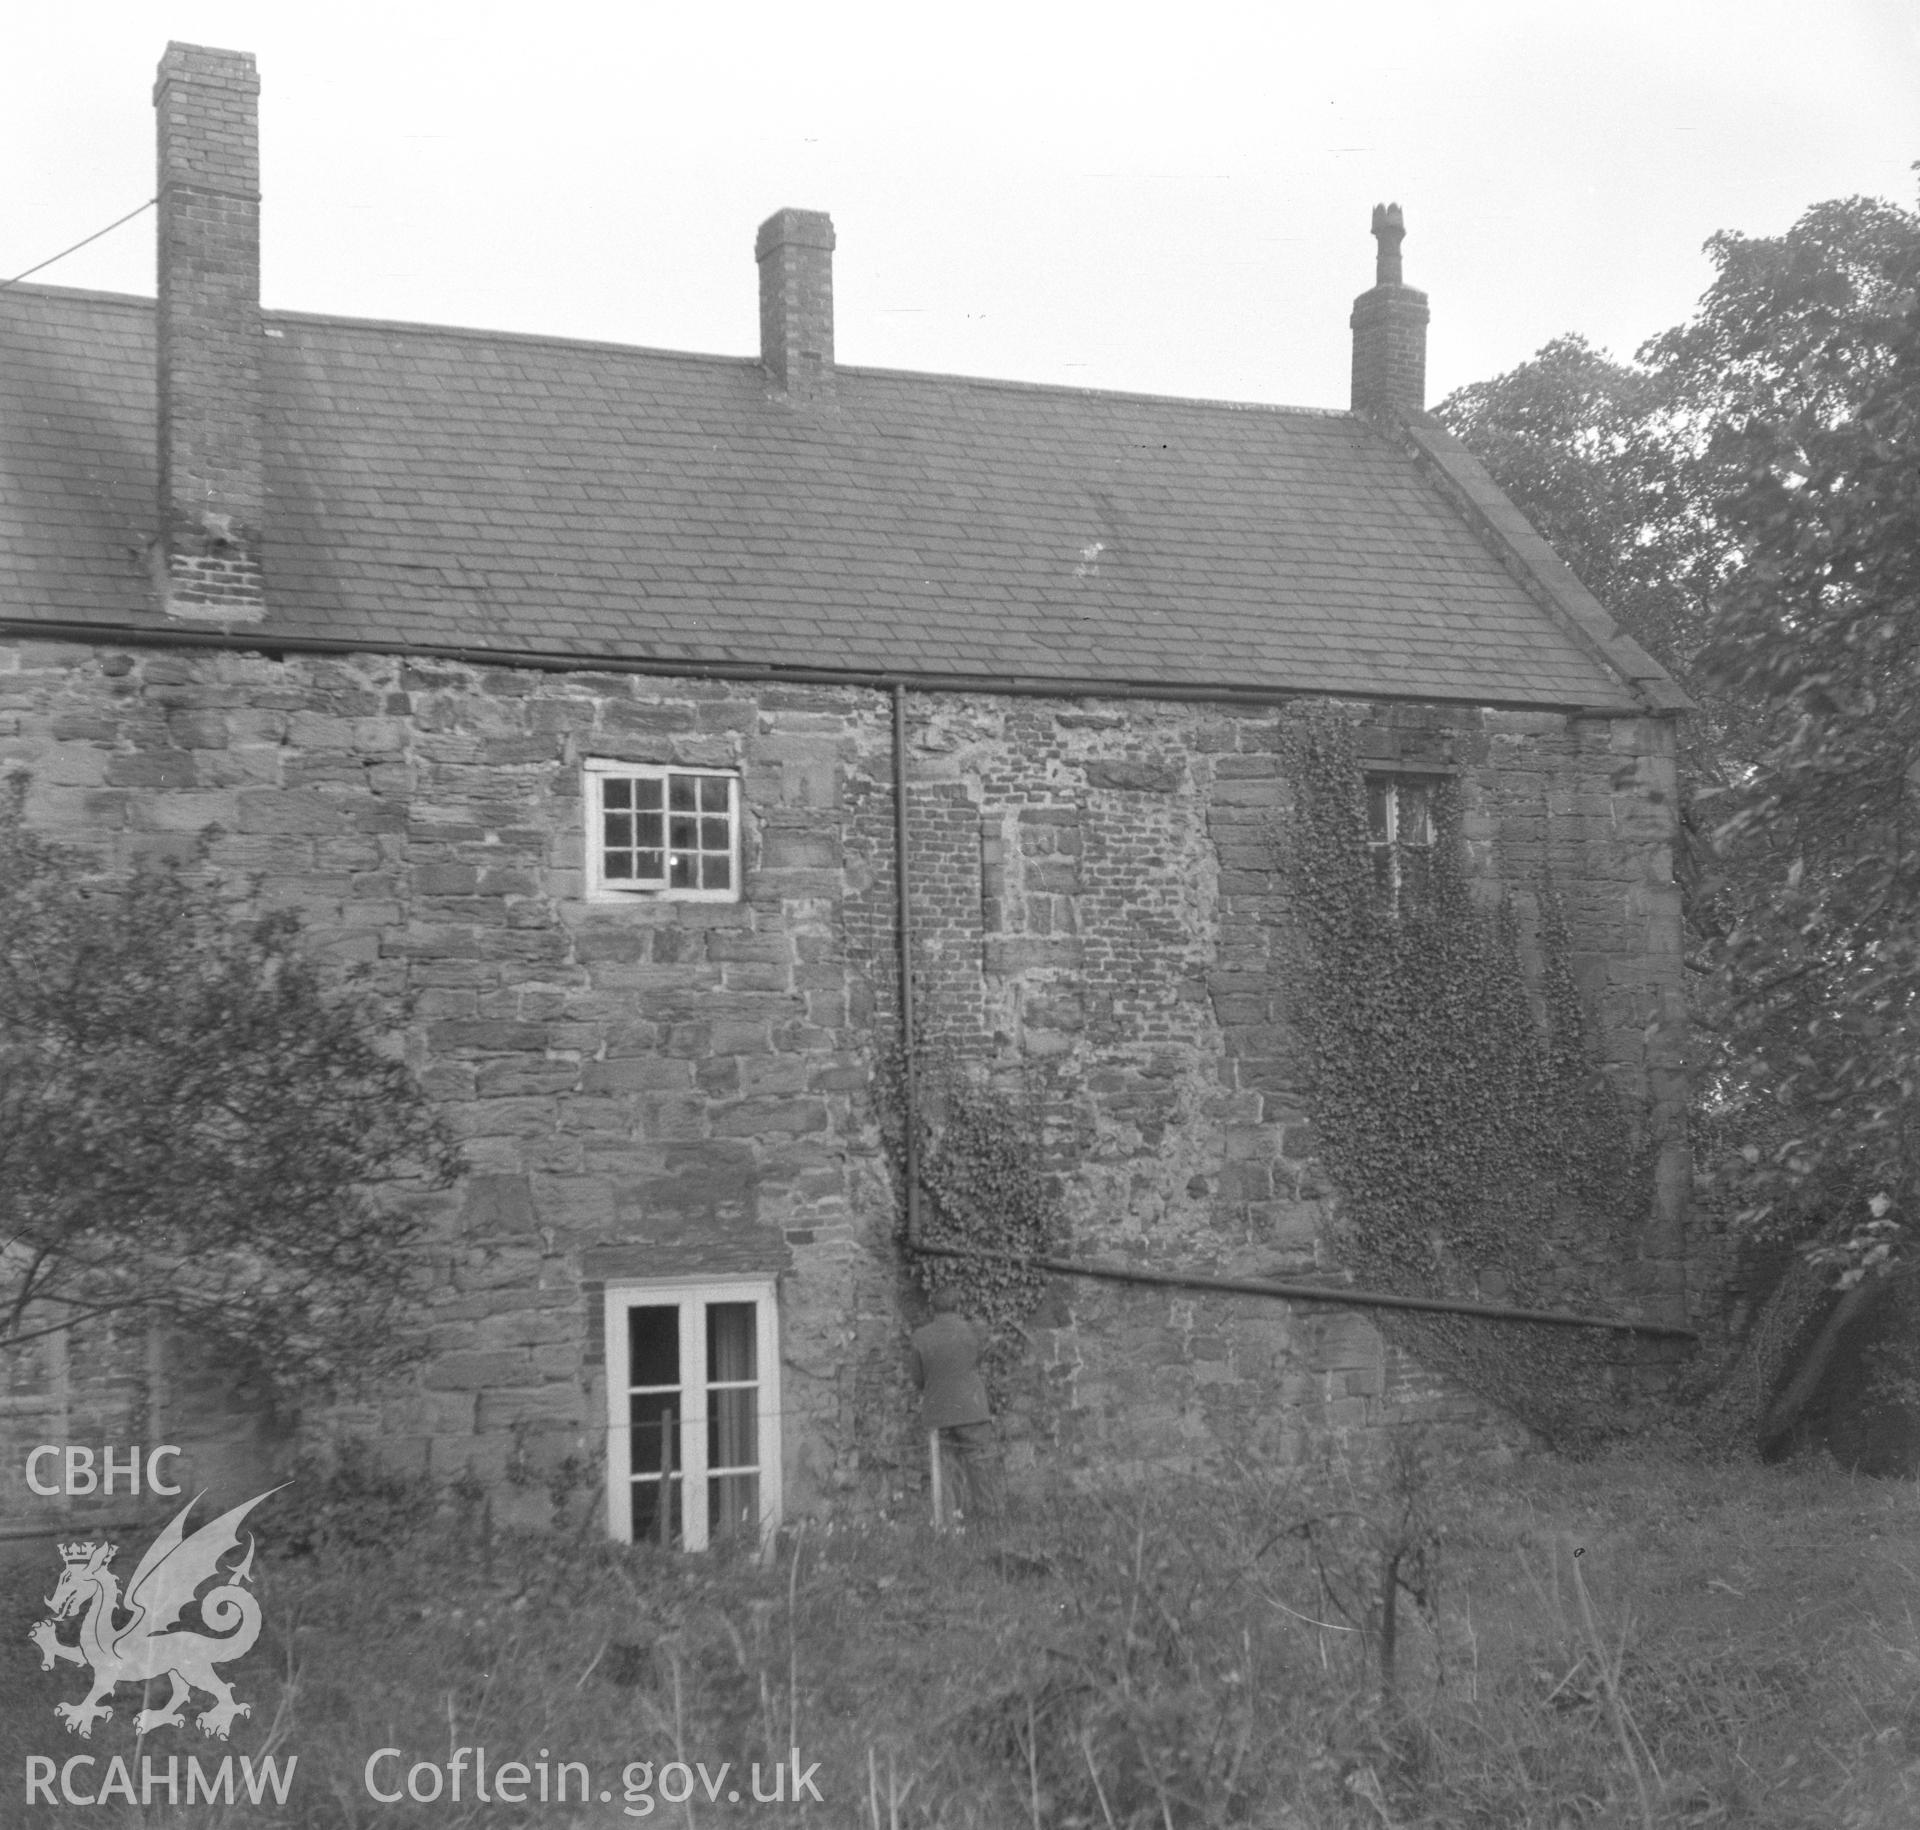 Digital copy of a black and white nitrate negative showing an exterior view of rear elevation of Llyseurgain.